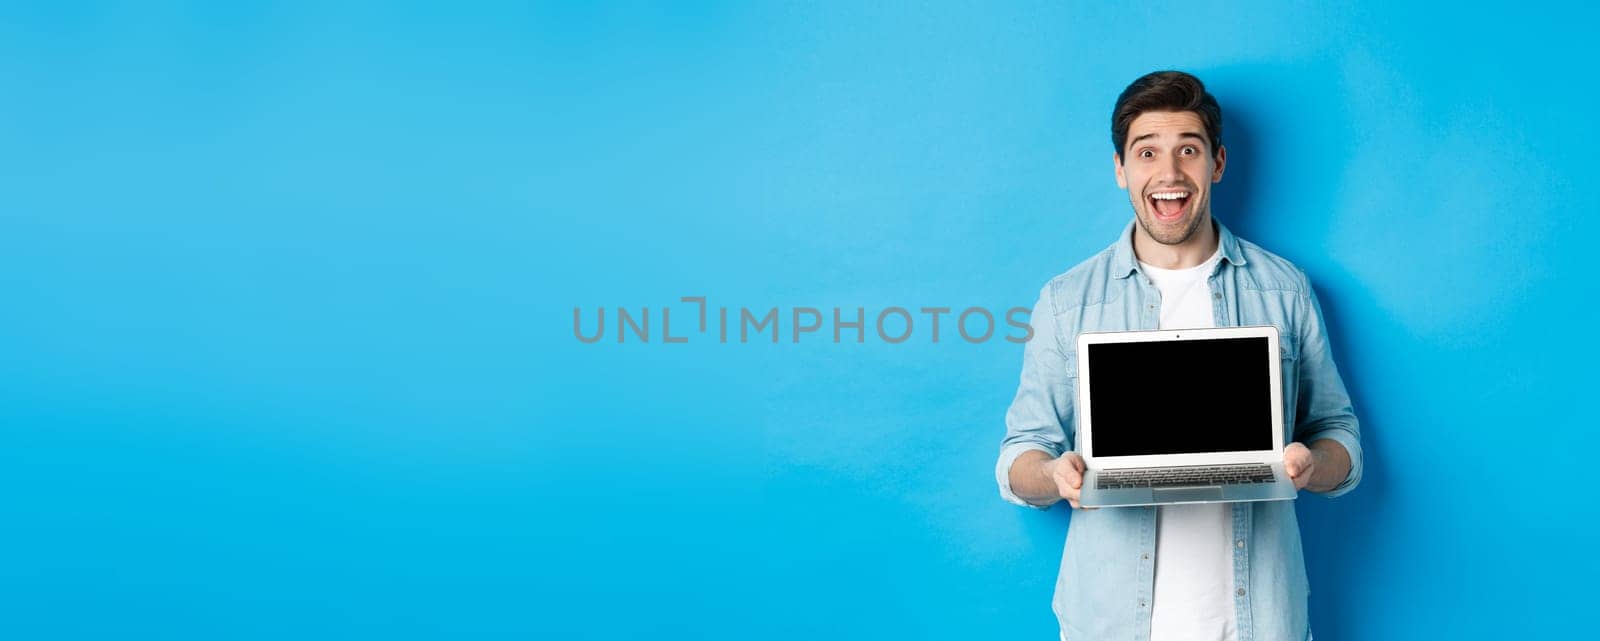 Cheerful smiling man making presentation, showing laptop screen and looking happy, standing over blue background.